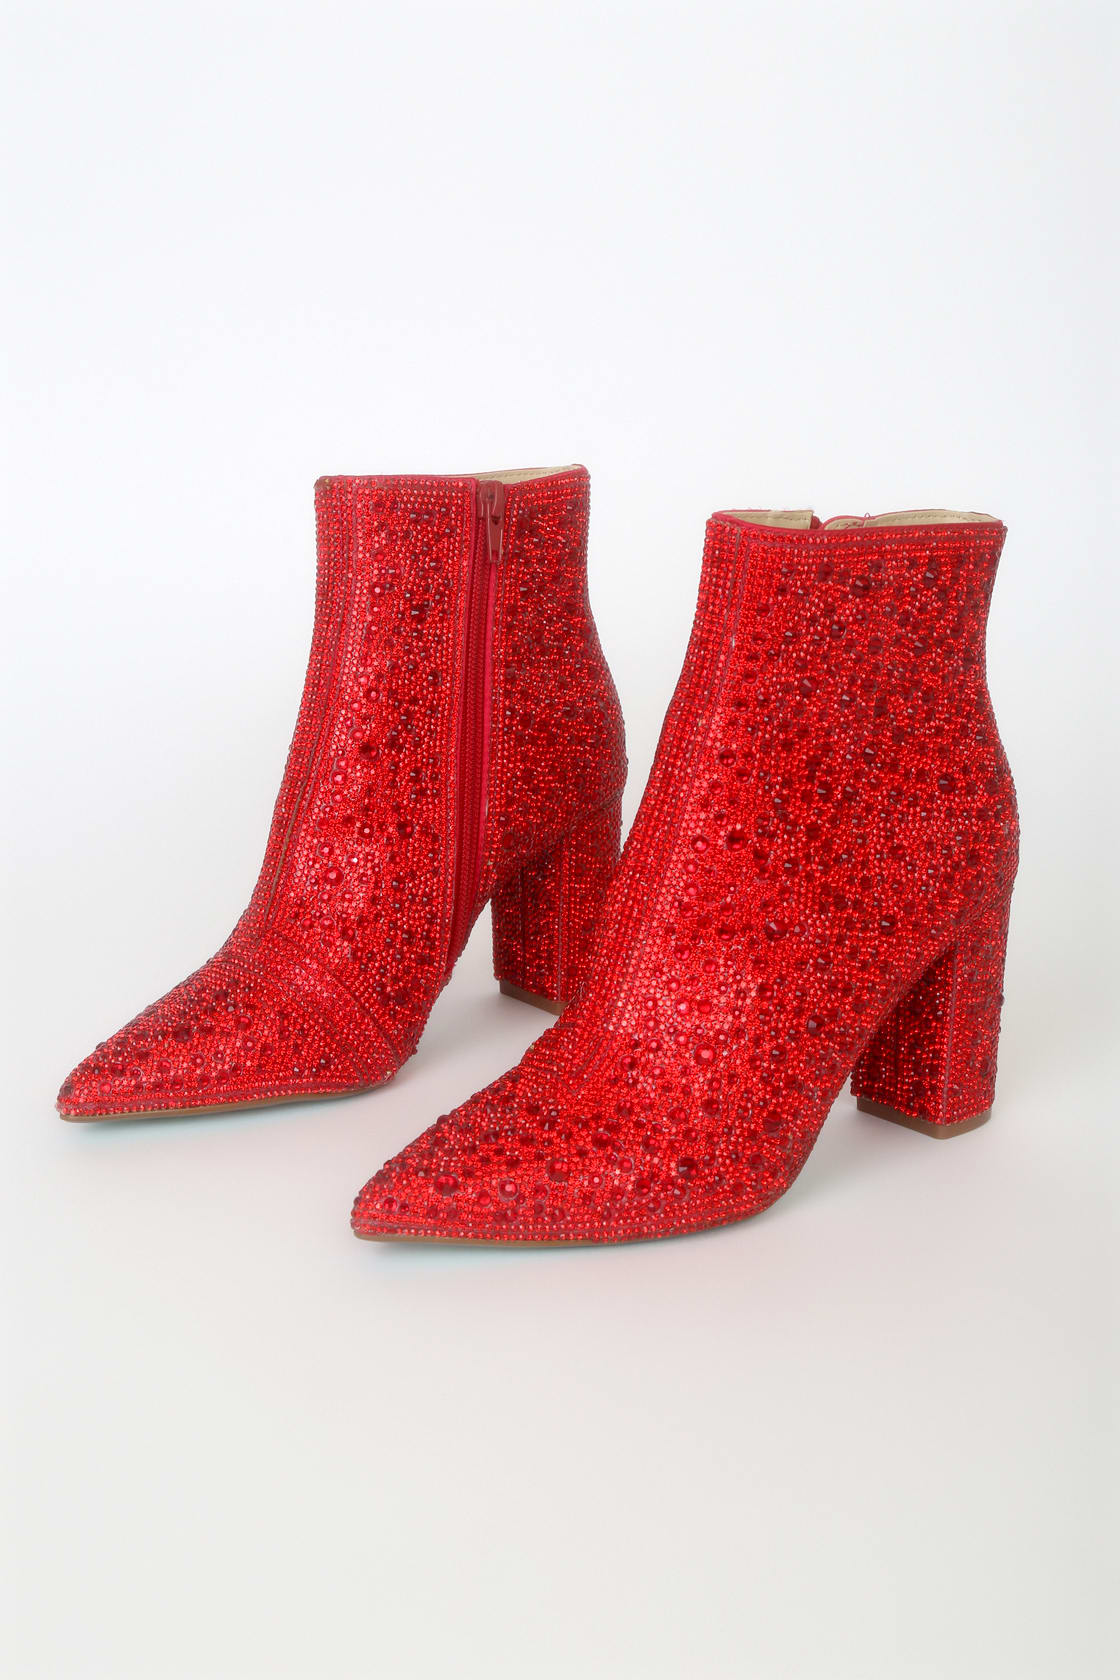 Betsey Johnson Cady - Red Boots - Rhinestone Boots - Ankle Boots - Lulus